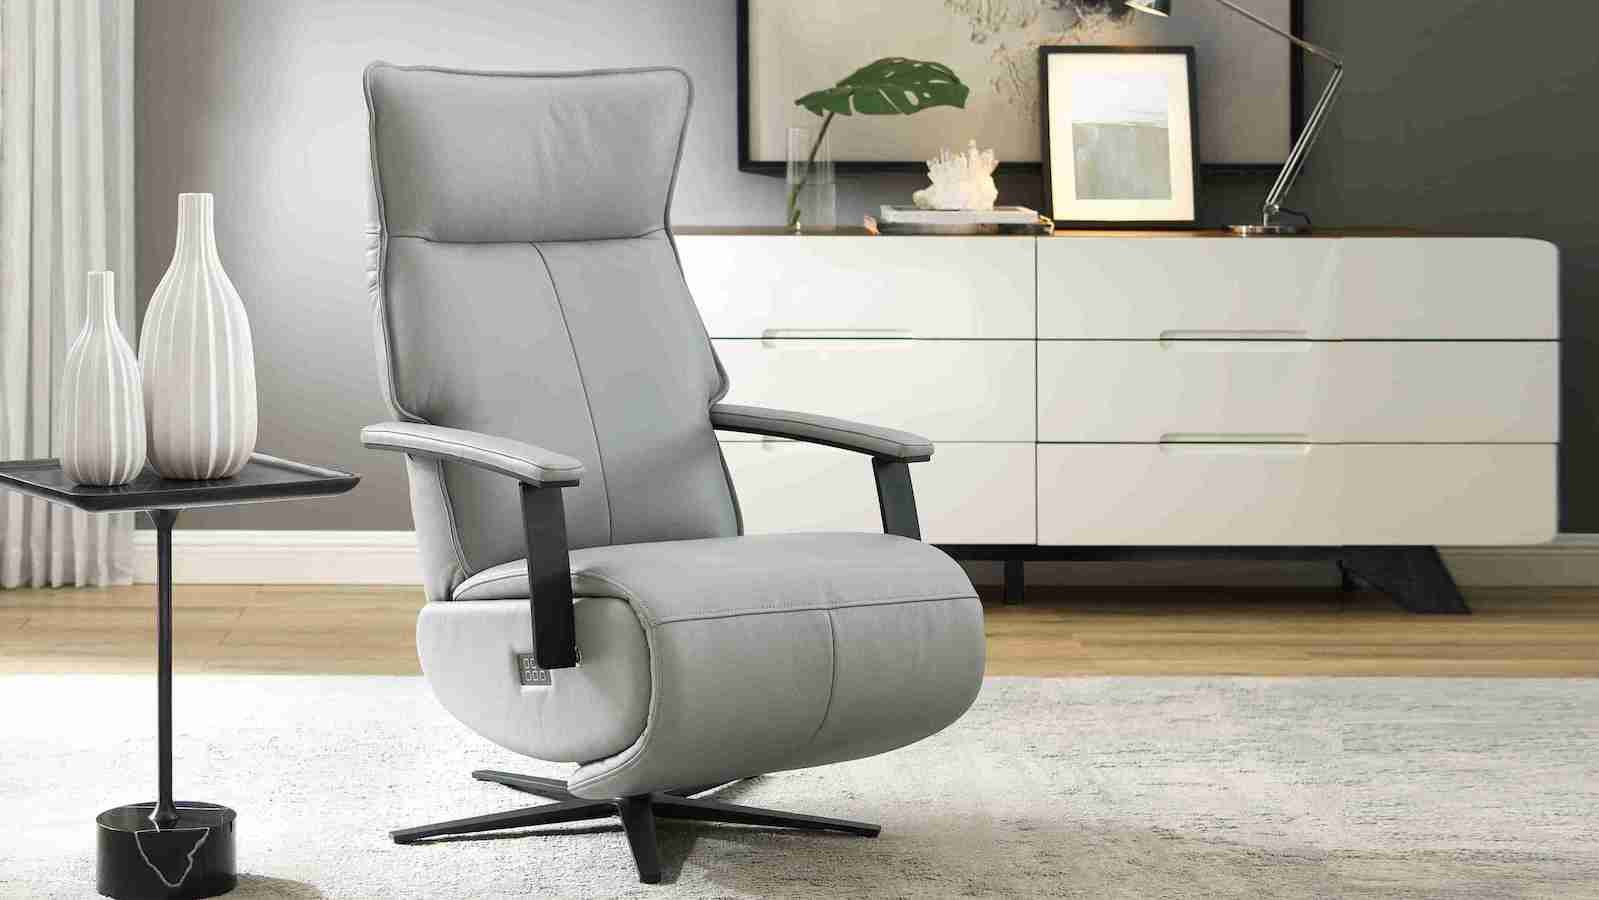 Modulax Eros zero-gravity recliner provides luxurious comfort and battery operation